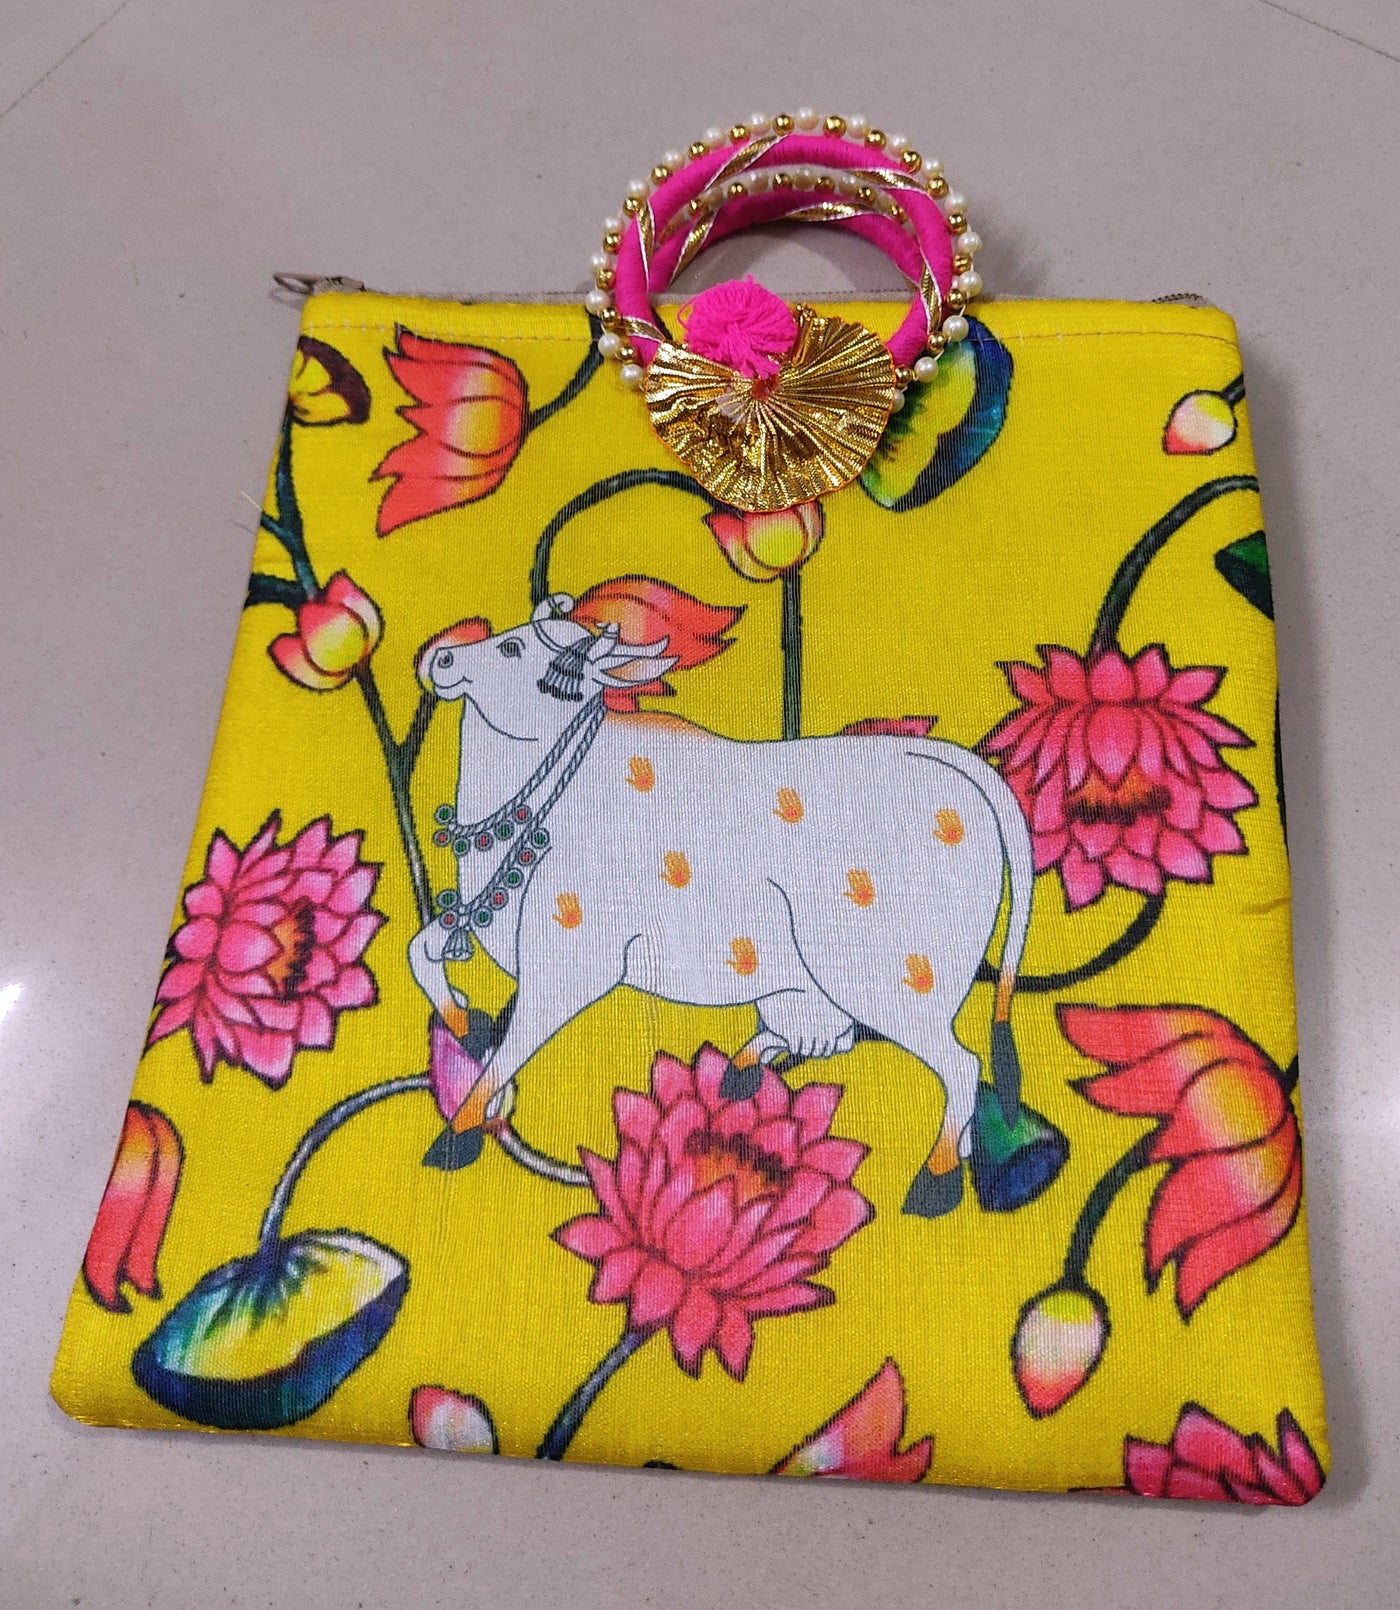 90 Rs each on buying 🏷in bulk | Call 📞 at 8619550223 gift hand bag LAMANSH® Pichwai Print Return Gifts 🎁 bags with gota chudi handle | Floral Print Hand Bags for Return Gifting in Puja & Wedding